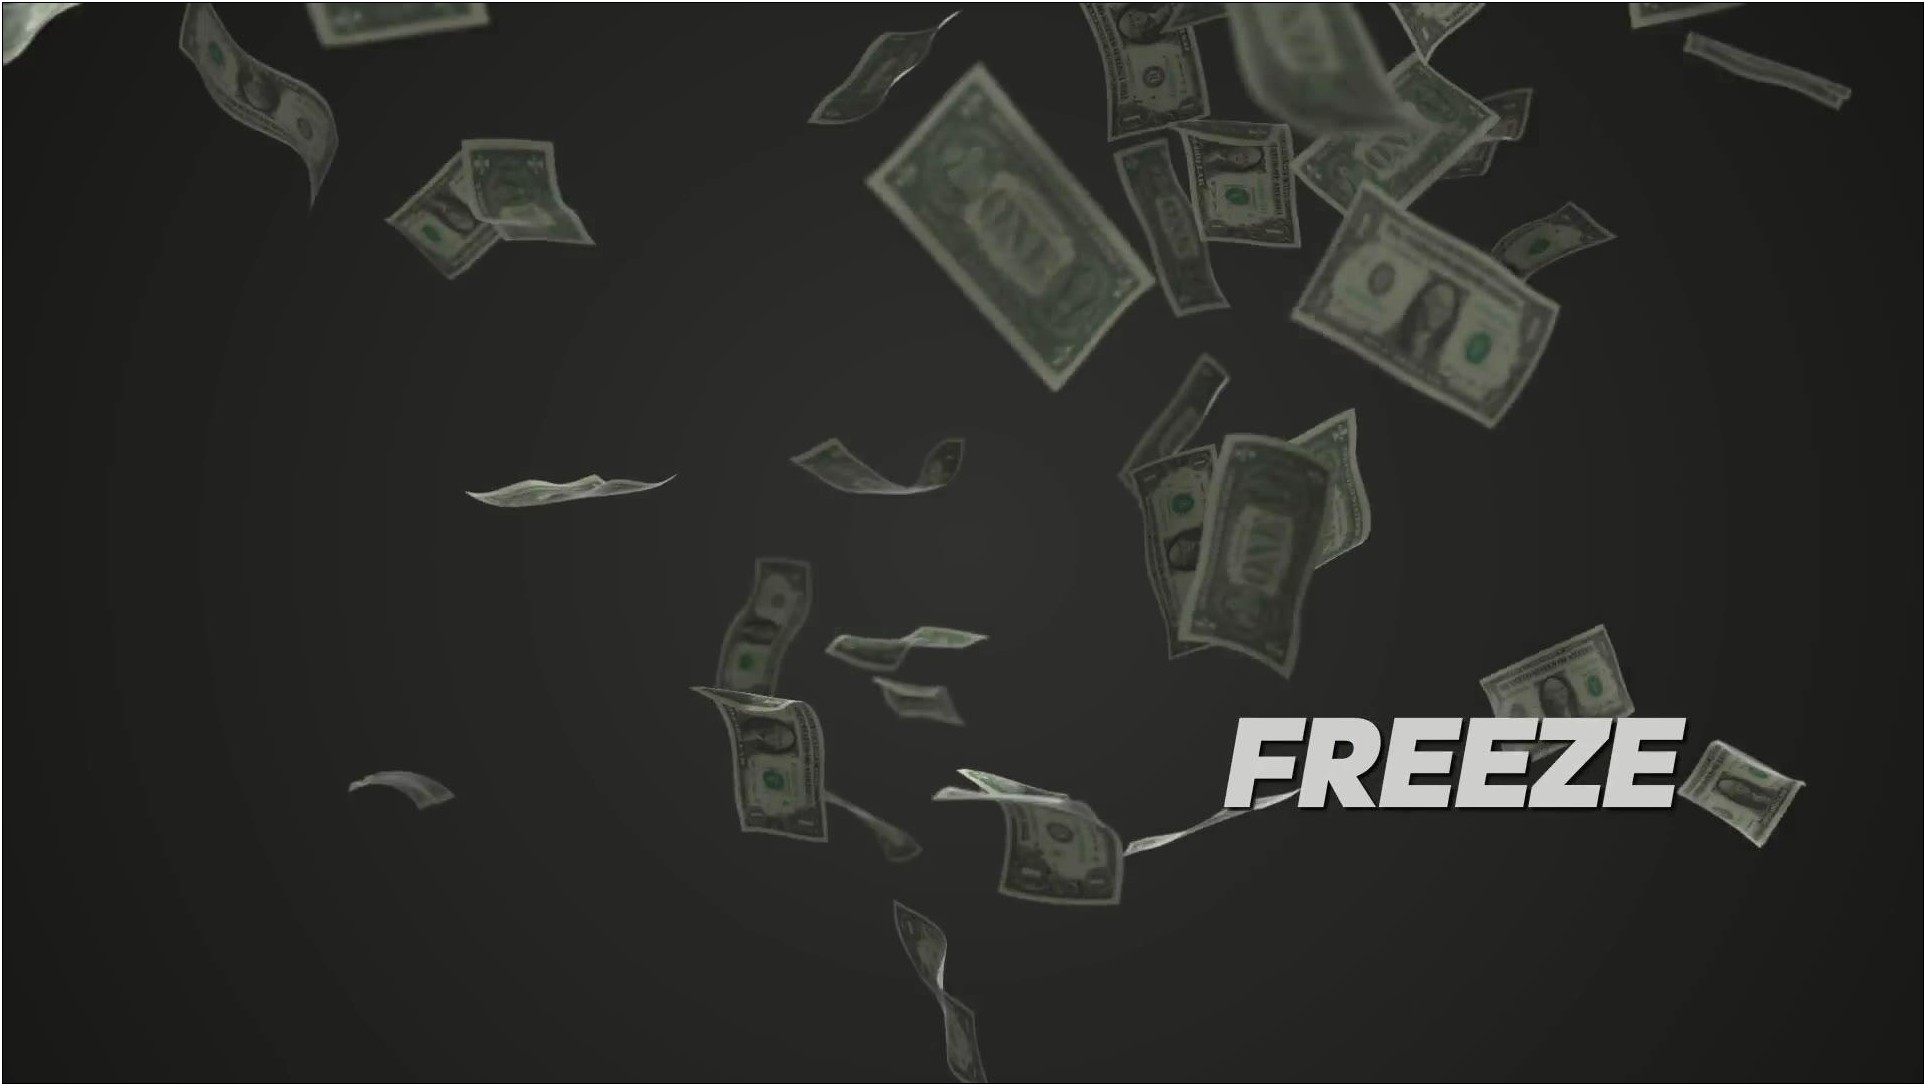 Raining Money After Effects Template Free